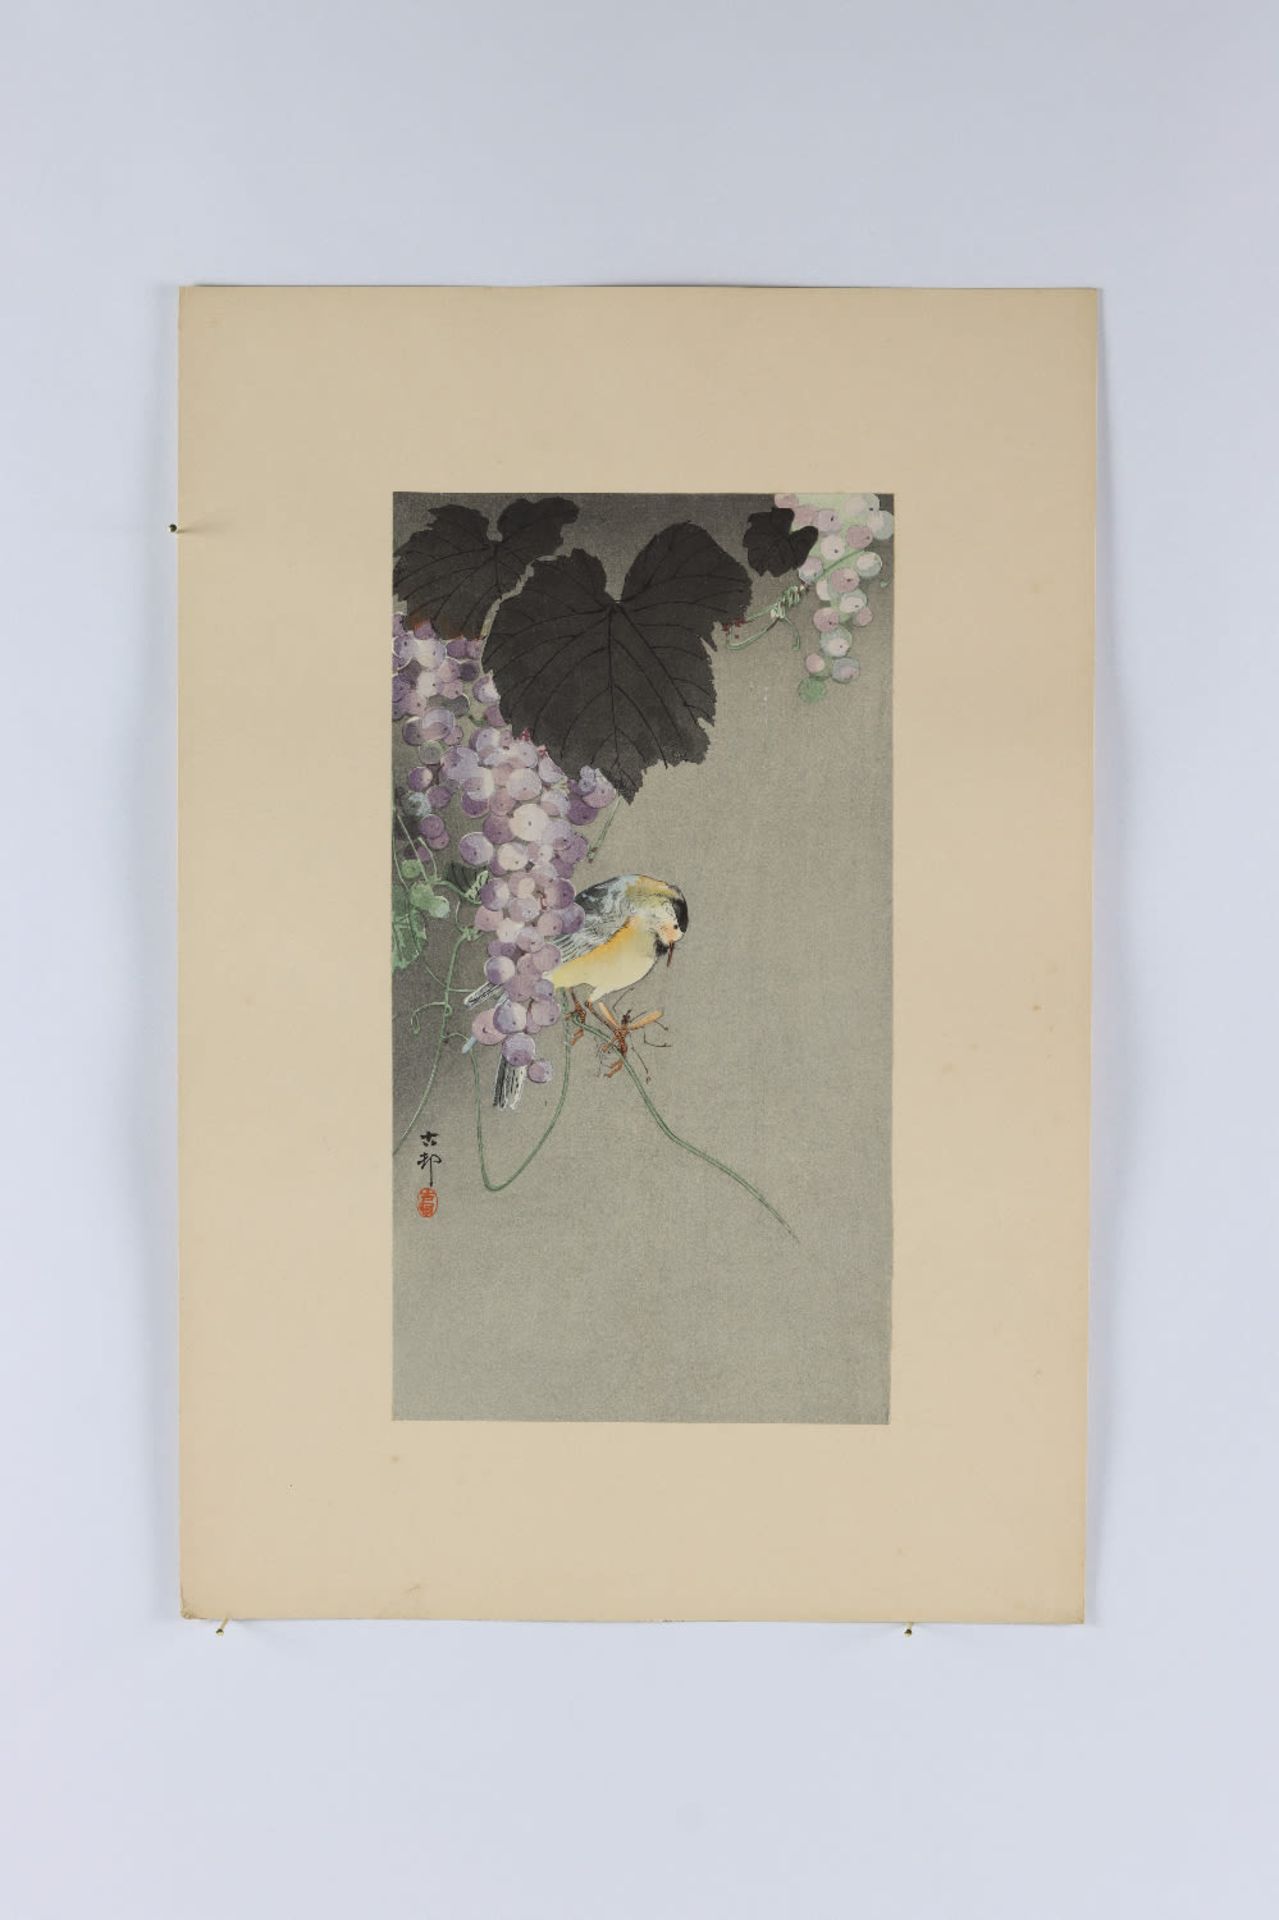 Willow tit on vine with insect, Koson Ohara 1877-1945 - Image 2 of 2